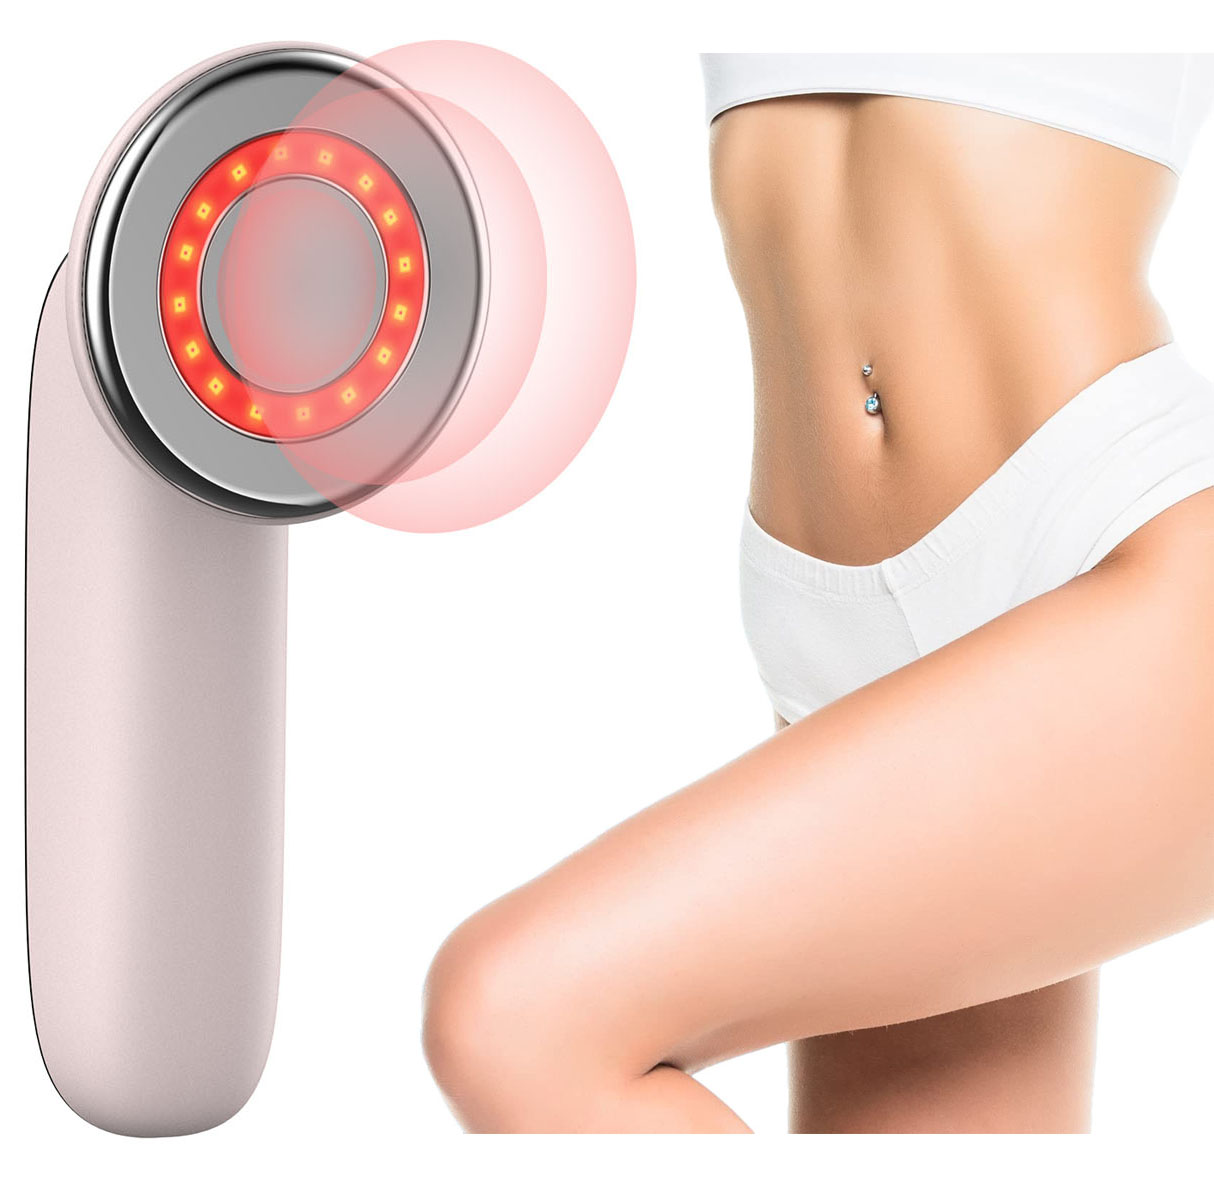 What is the difference between microcurrent and radiofrequency beauty devices?